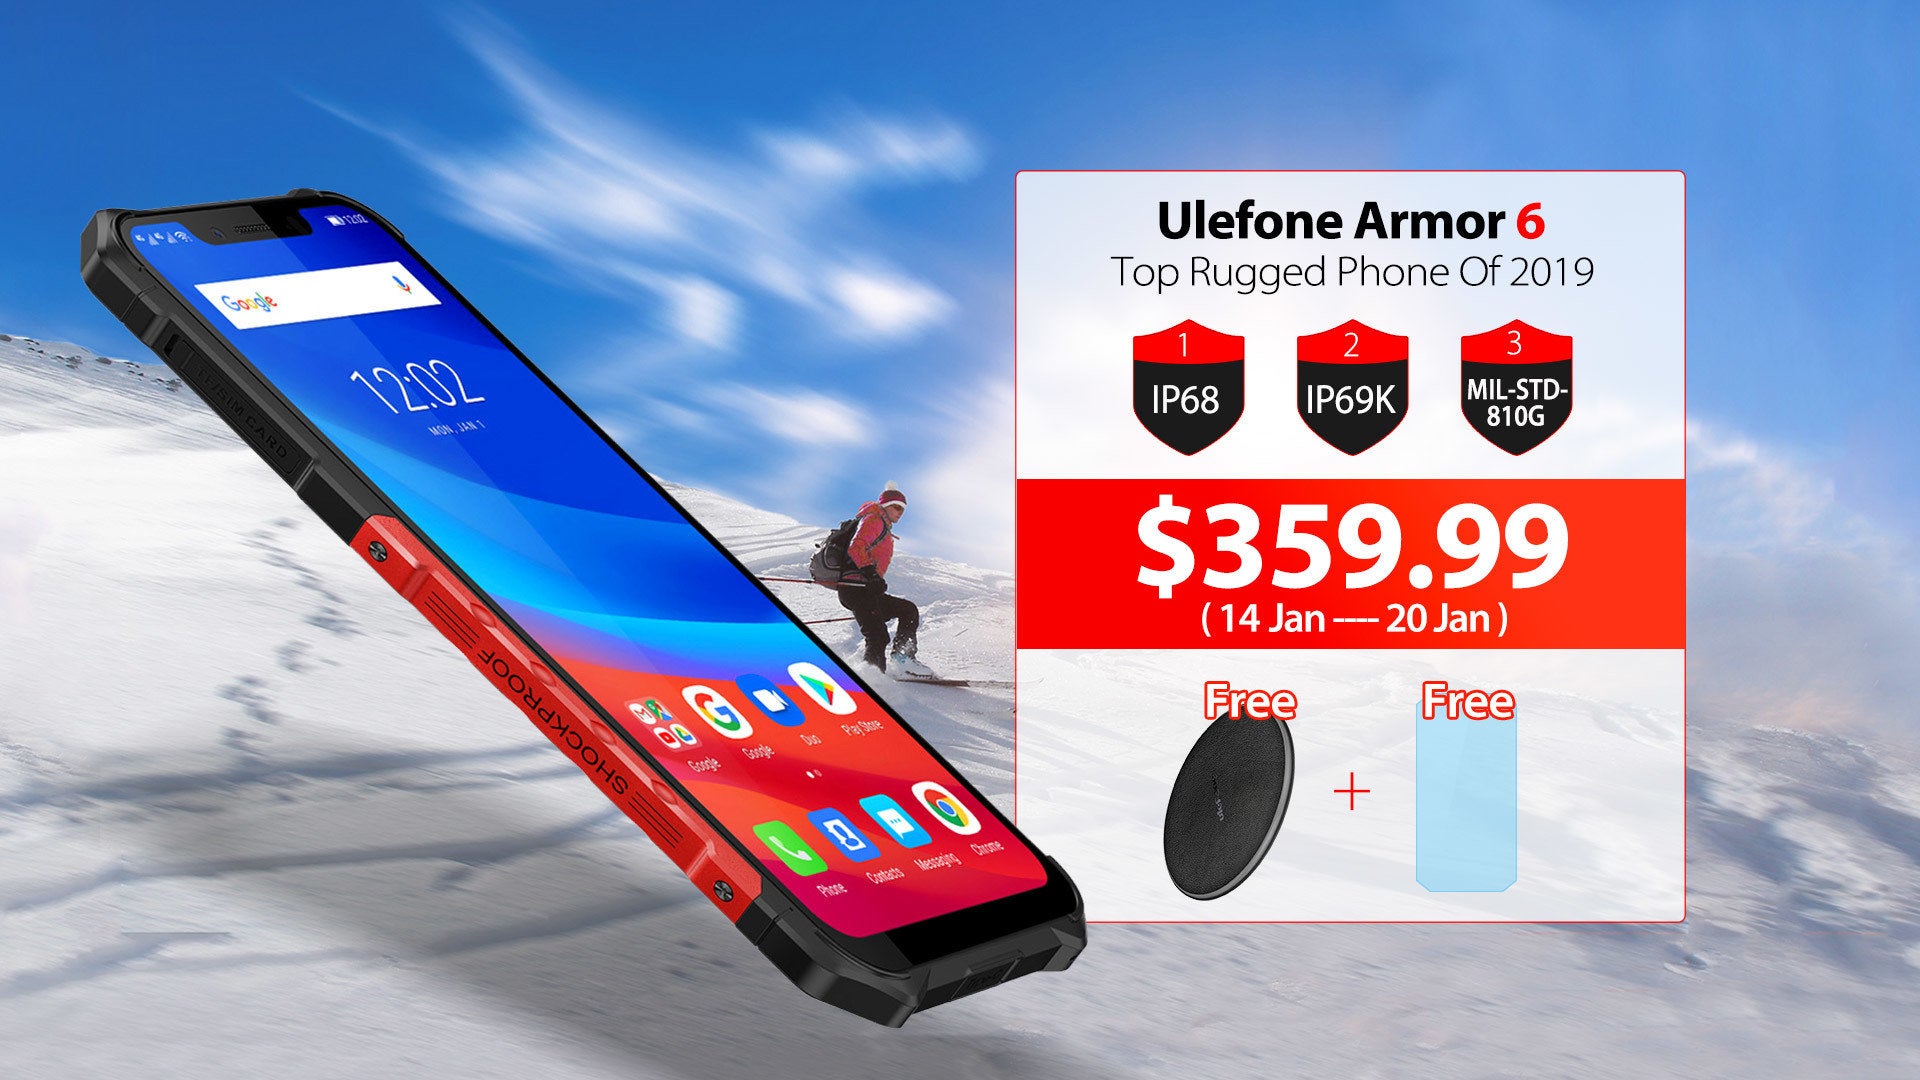 The Ulefone Armor 6 is the phone that will go through anything alongside you